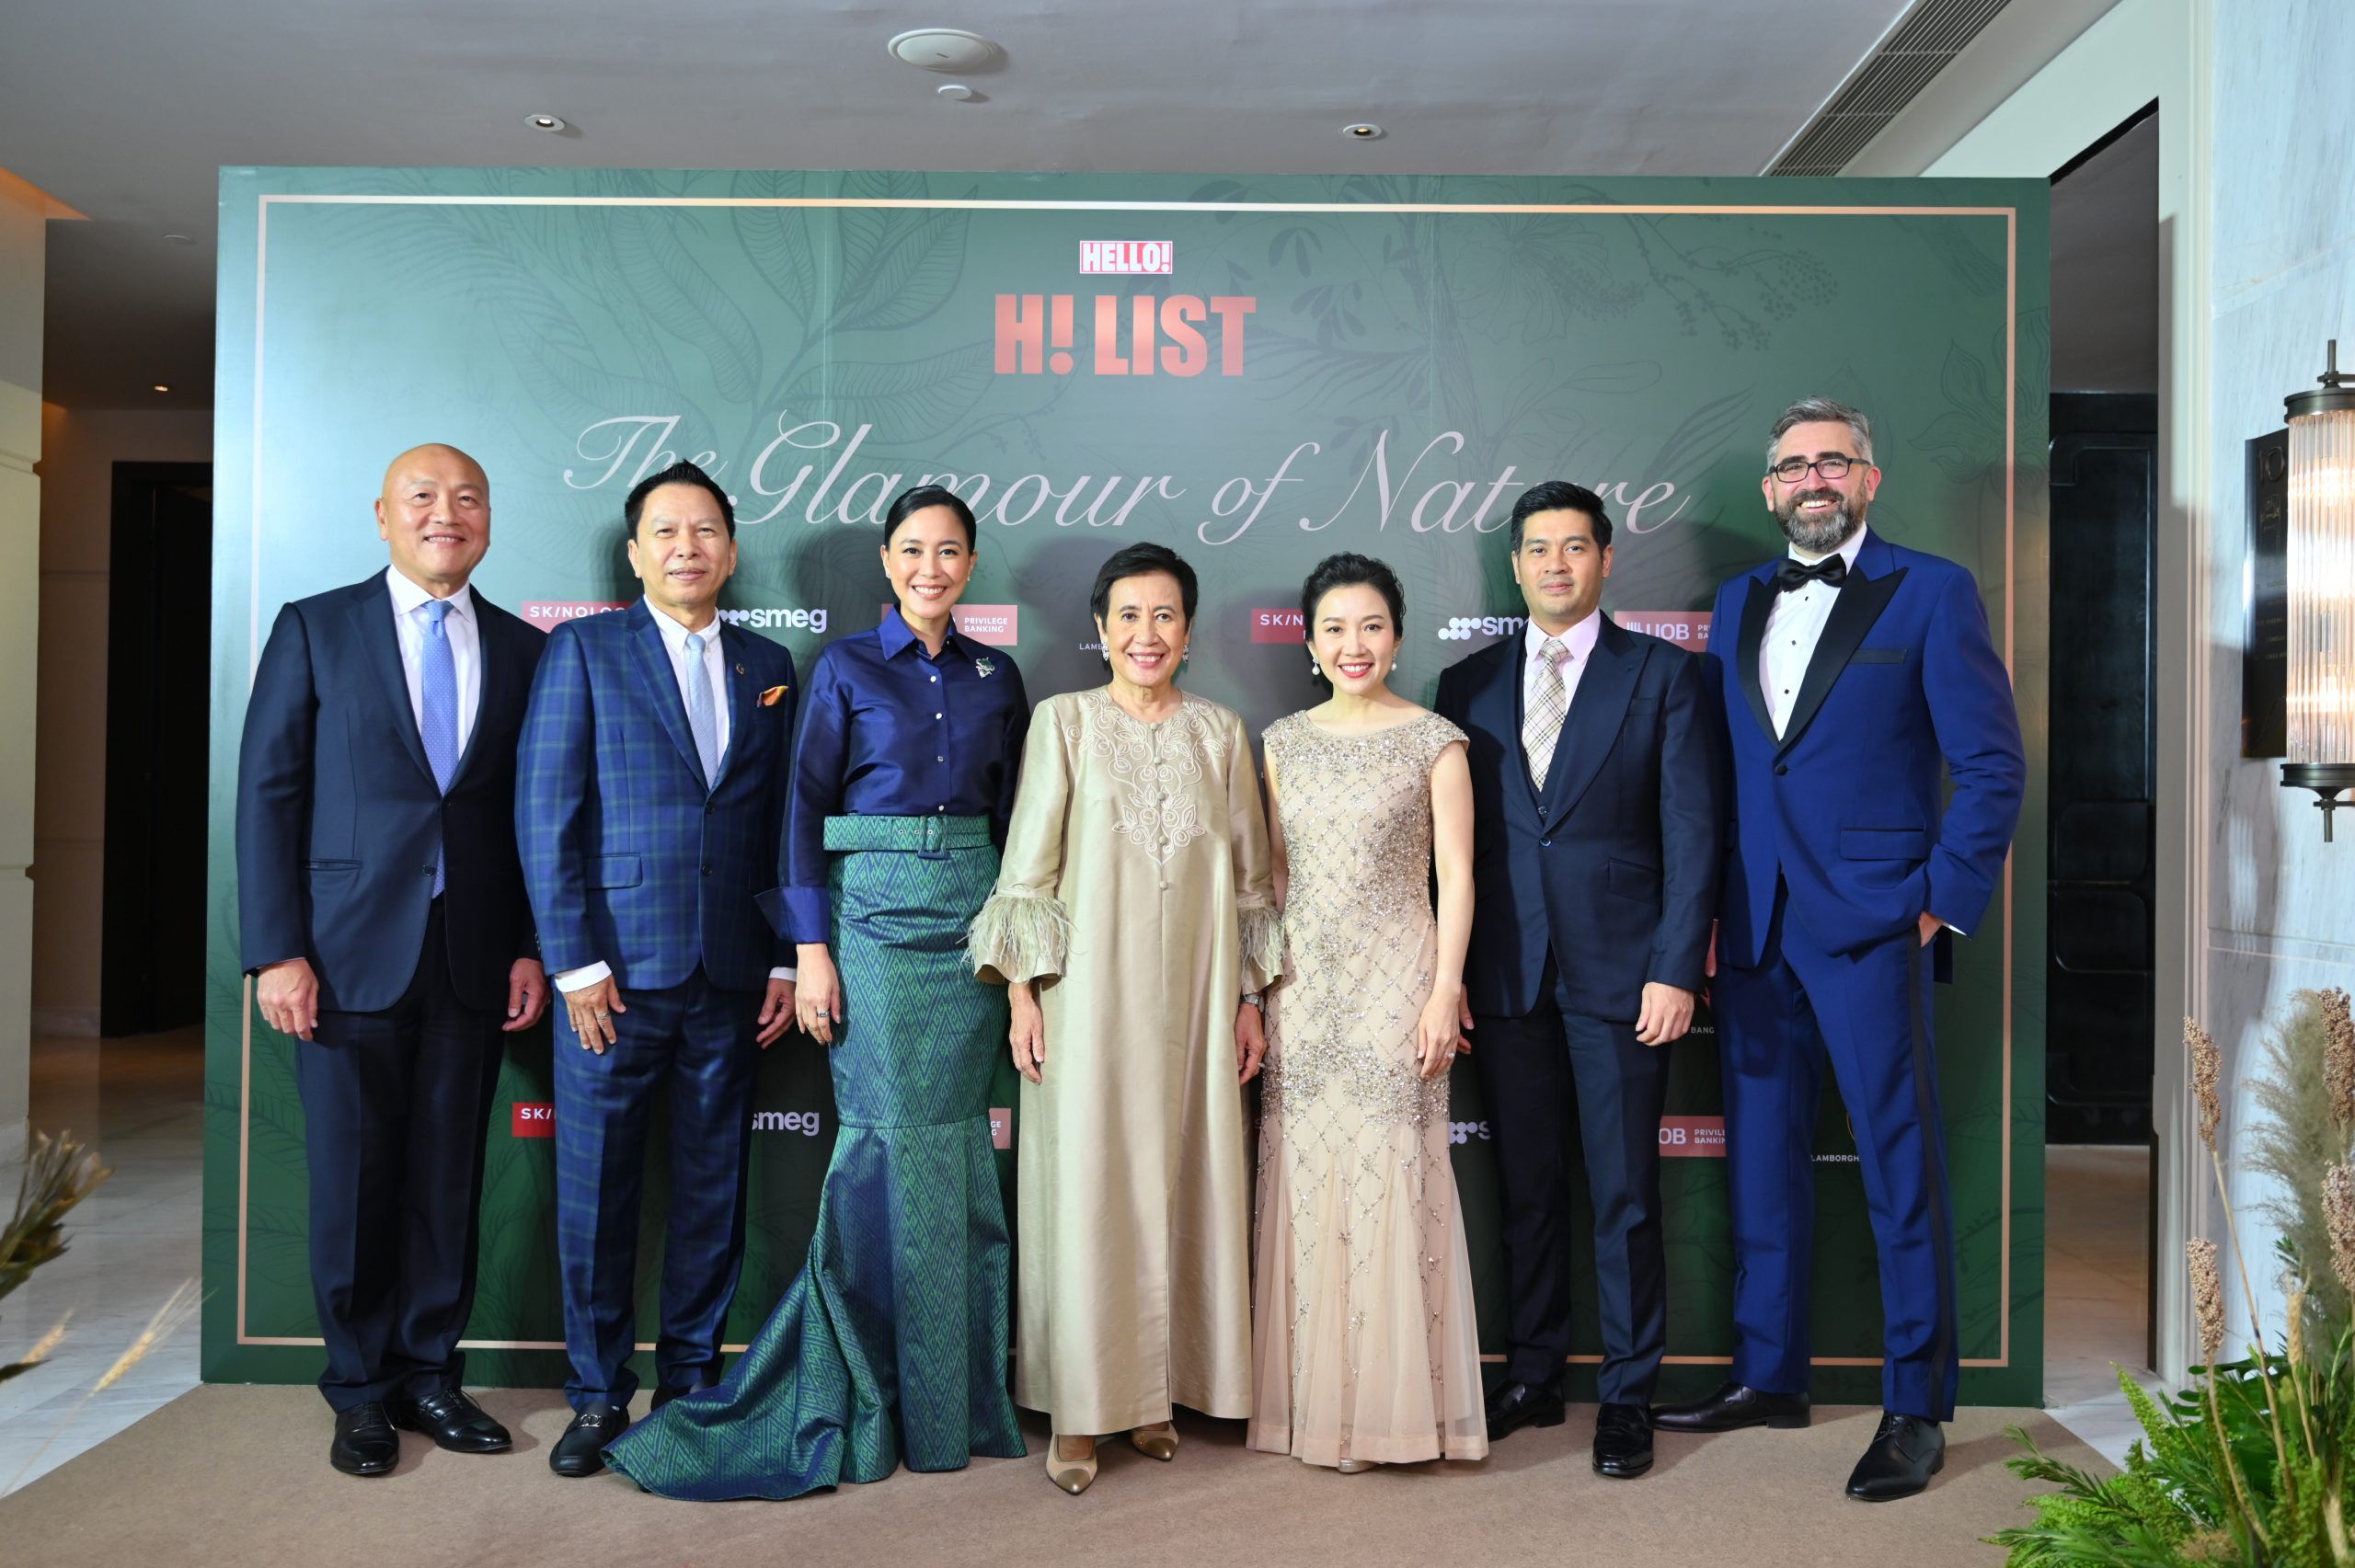 HELLO! Magazine Thailand Hosts H! LIST 2023: ‘The Glamour of Nature’ Charity Dinner